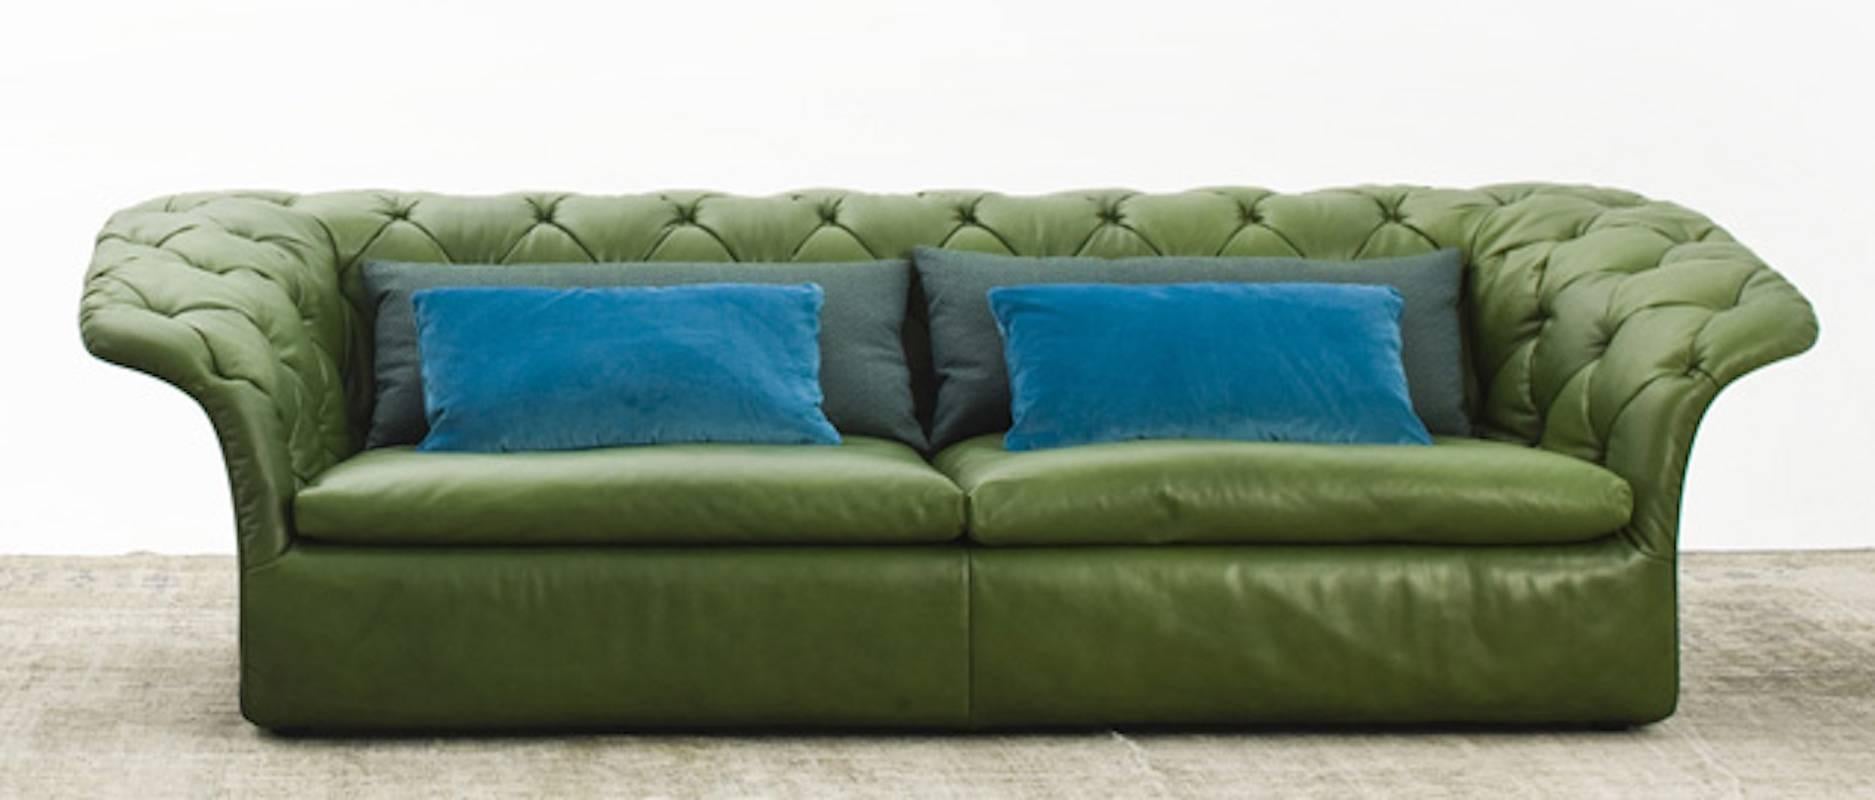 Modern Moroso Bohemian Three-Seat Sofa in Tufted Leather by Patricia Urquiola For Sale